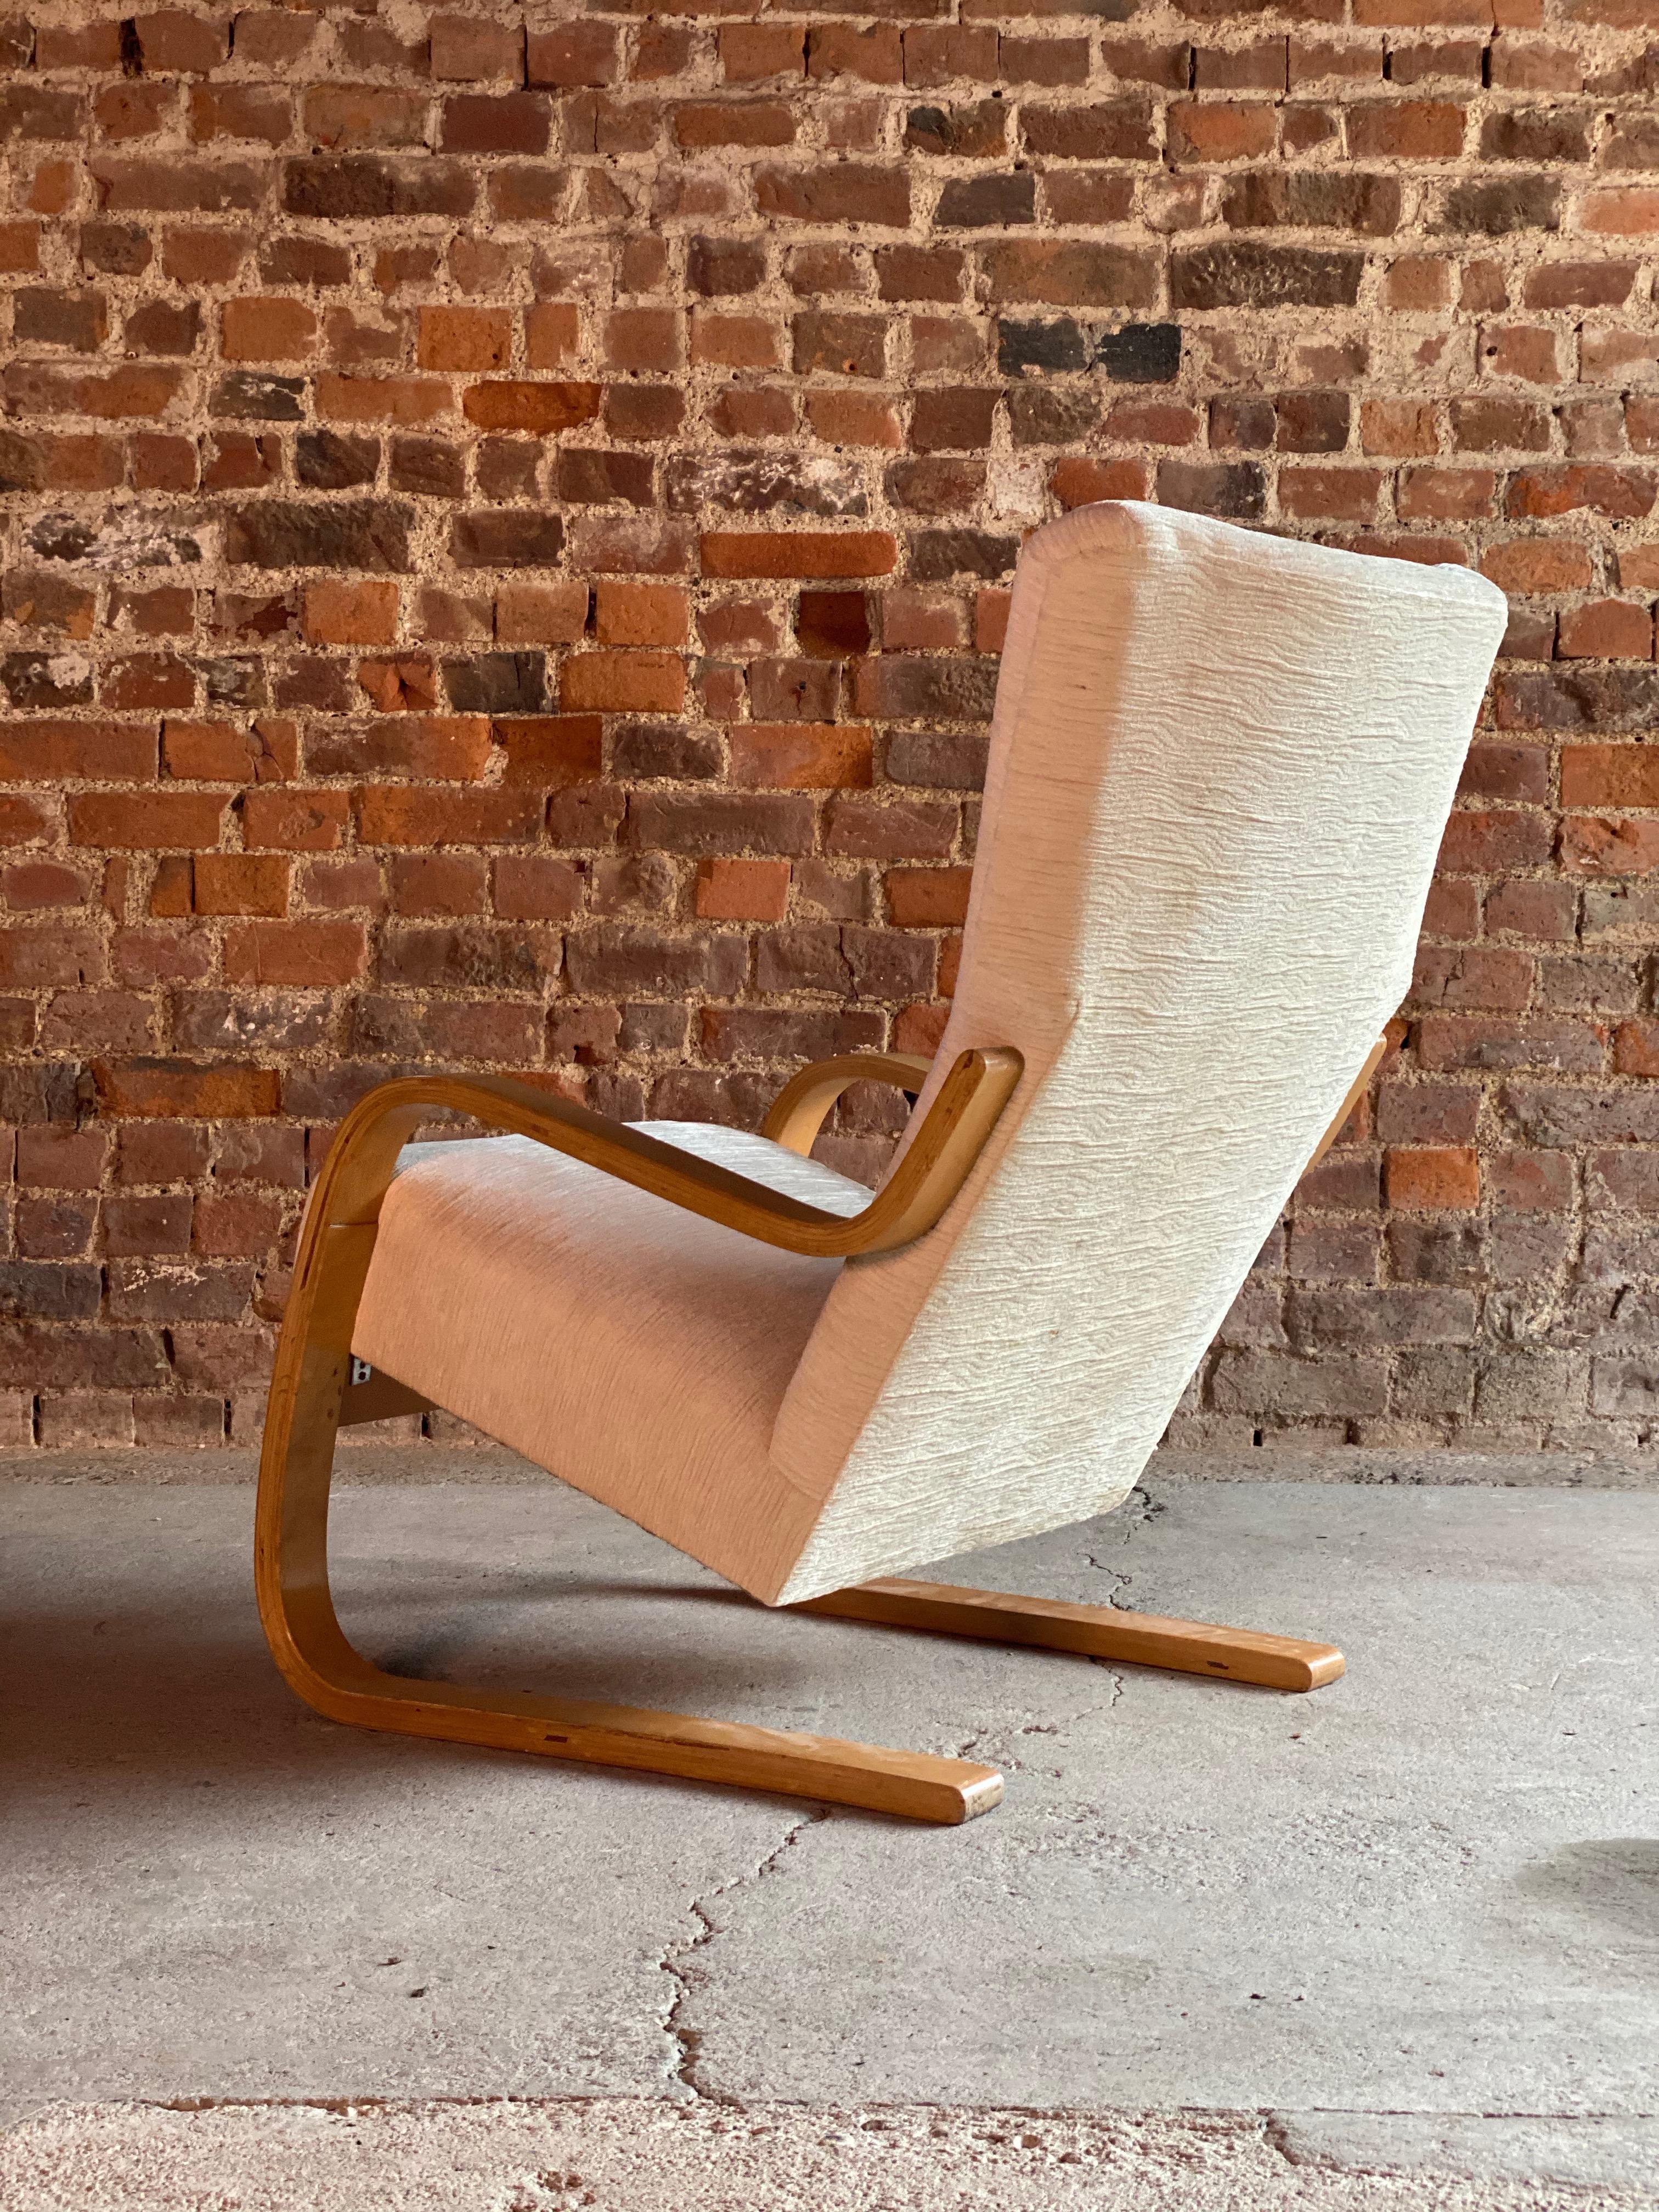 Finnish Alvar Aalto Model 36 / 401 Cantilever Lounge Chair by Finmar Finland, circa 1940